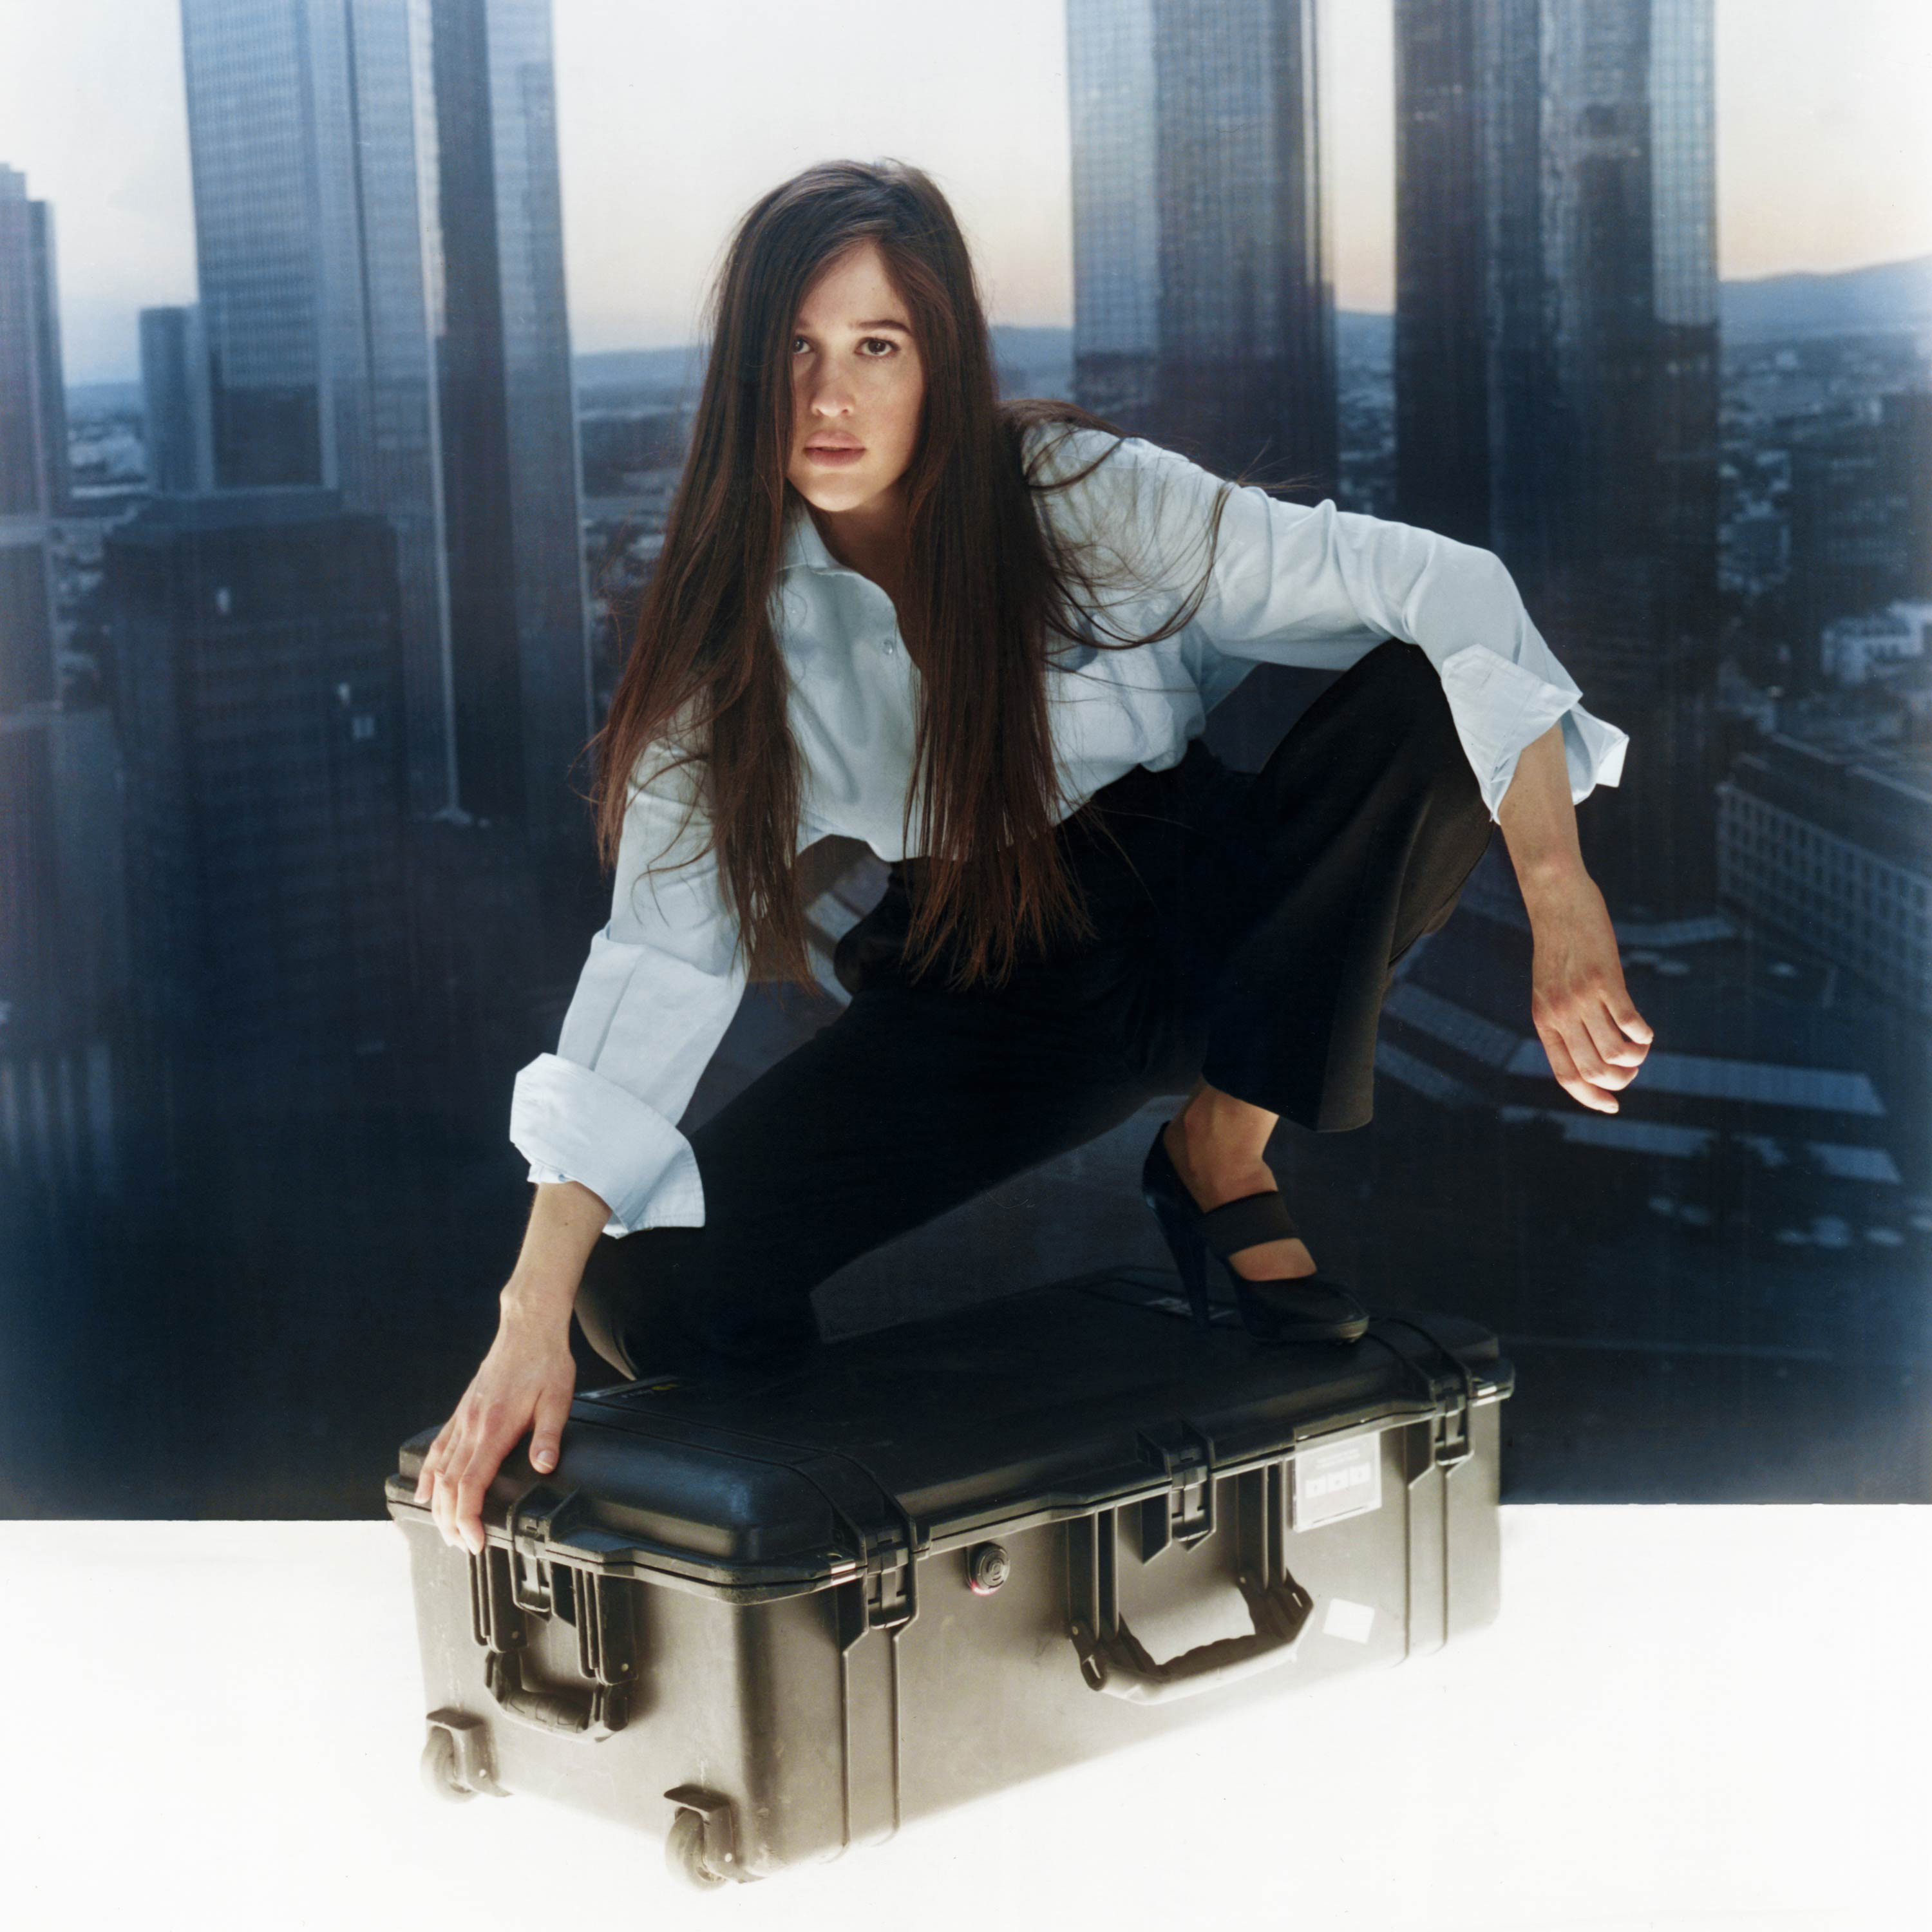 Marie Davidson Announces New Album <i>Working Class Woman</i> With “So Right”” title=”marie-davidson-working-class-woman-cover-art-1535654978″ data-original-id=”302633″ data-adjusted-id=”302633″ class=”sm_size_full_width sm_alignment_center ” data-image-source=”free_stock” />
<p><strong>Marie Davidson, <em>Working Class Woman</em> track list<br />
</strong>1. “Your Biggest Fan”<br />
2. “Work It”<br />
3. “The Psychologist”<br />
4. “Lara”<br />
5. “Day Dreaming”<br />
6. “The Tunnel”<br />
7. “Workaholic Paranoid Bitch”<br />
8. “So Right”<br />
9. “Burn Me”<br />
10. “La chambre intérieure”</p>
</p>		</div>
				</div>
						</div>
					</div>
		</div>
								</div>
					</div>
		</section>
				<section data-particle_enable=